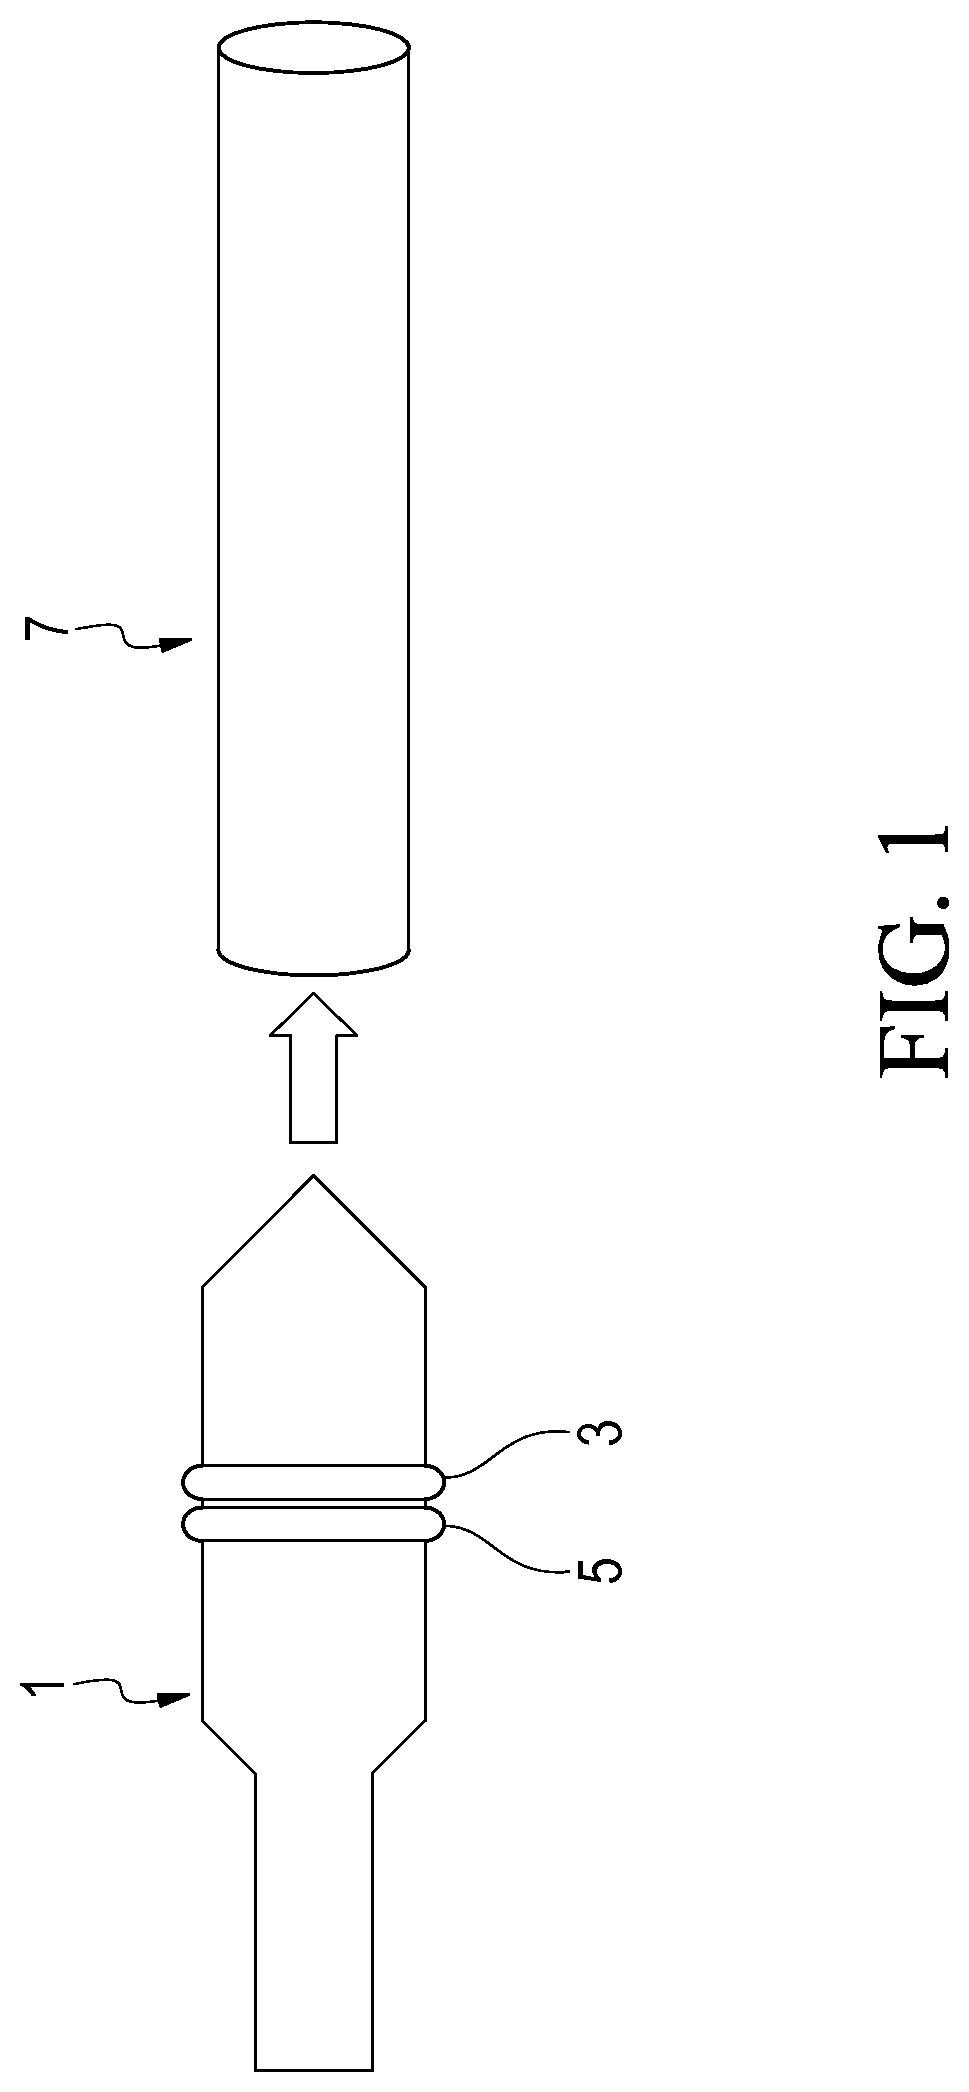 Method of manufacturing bell socketed plastic pipes